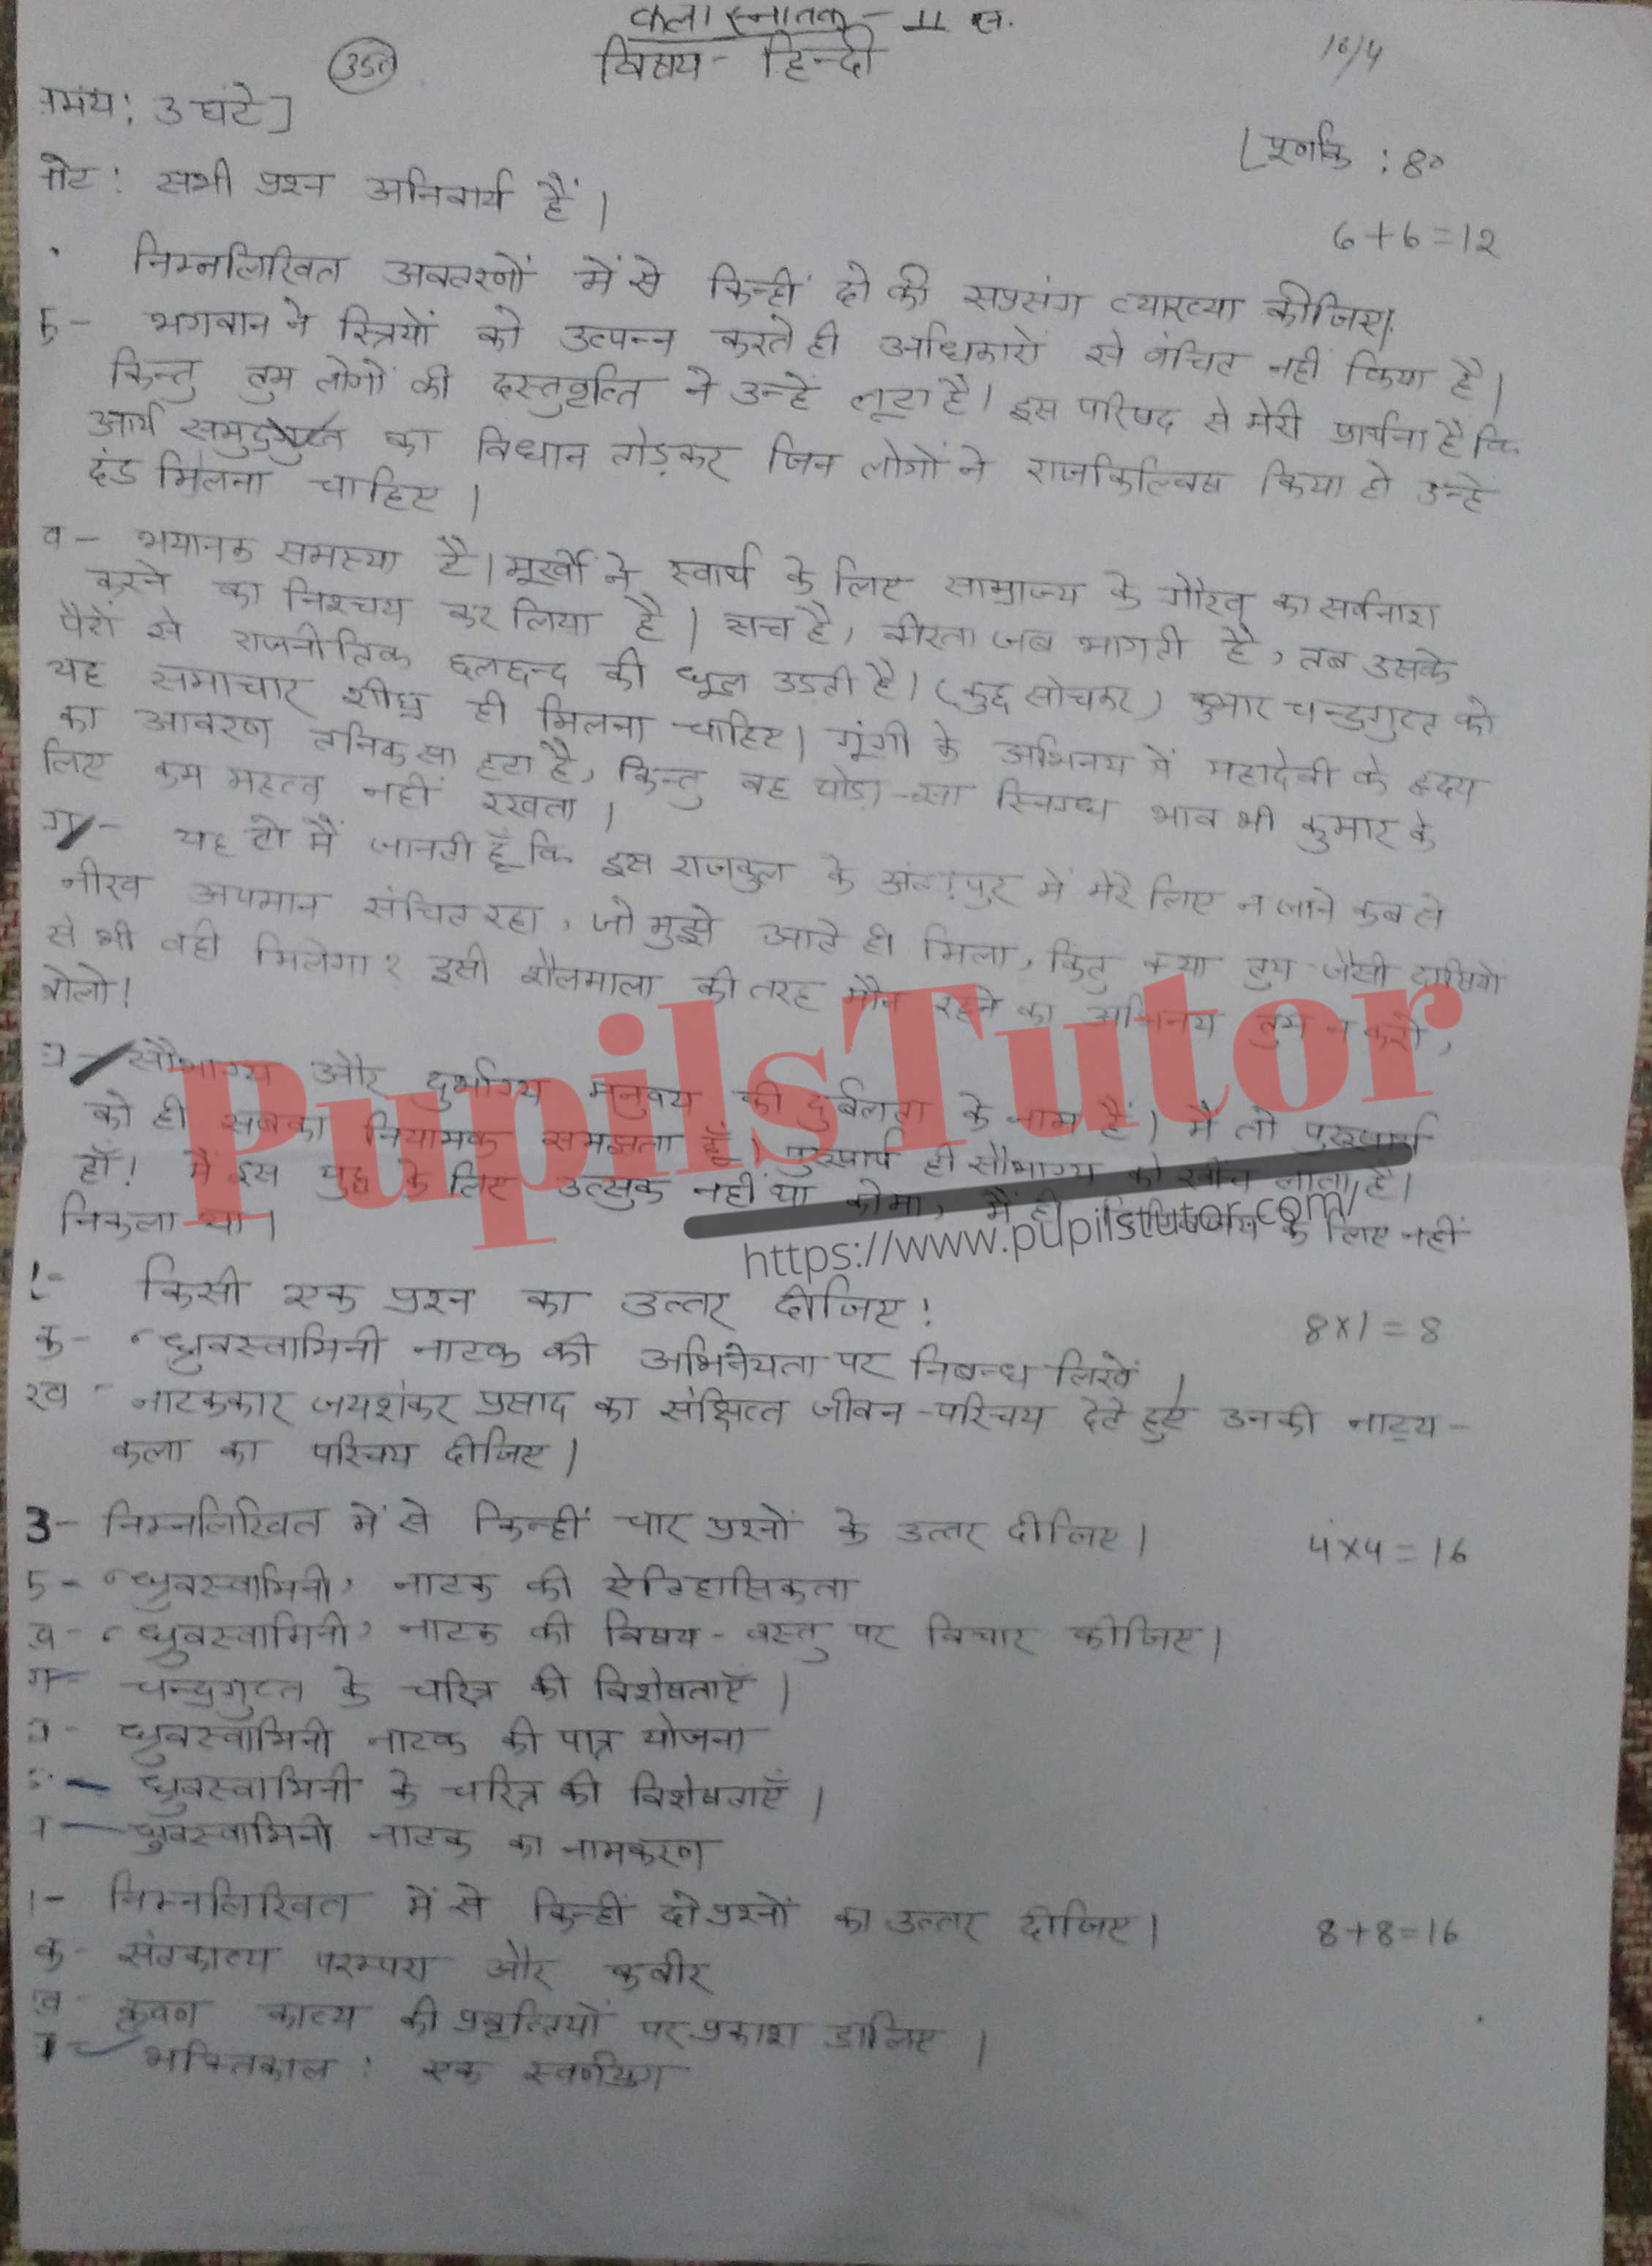 MDU (Maharshi Dayanand University, Rohtak Haryana) BA Home Exam (Sample Paper) Second Semester Previous Year Hindi Question Paper For 2022 Exam (Question Paper Page 1) - pupilstutor.com